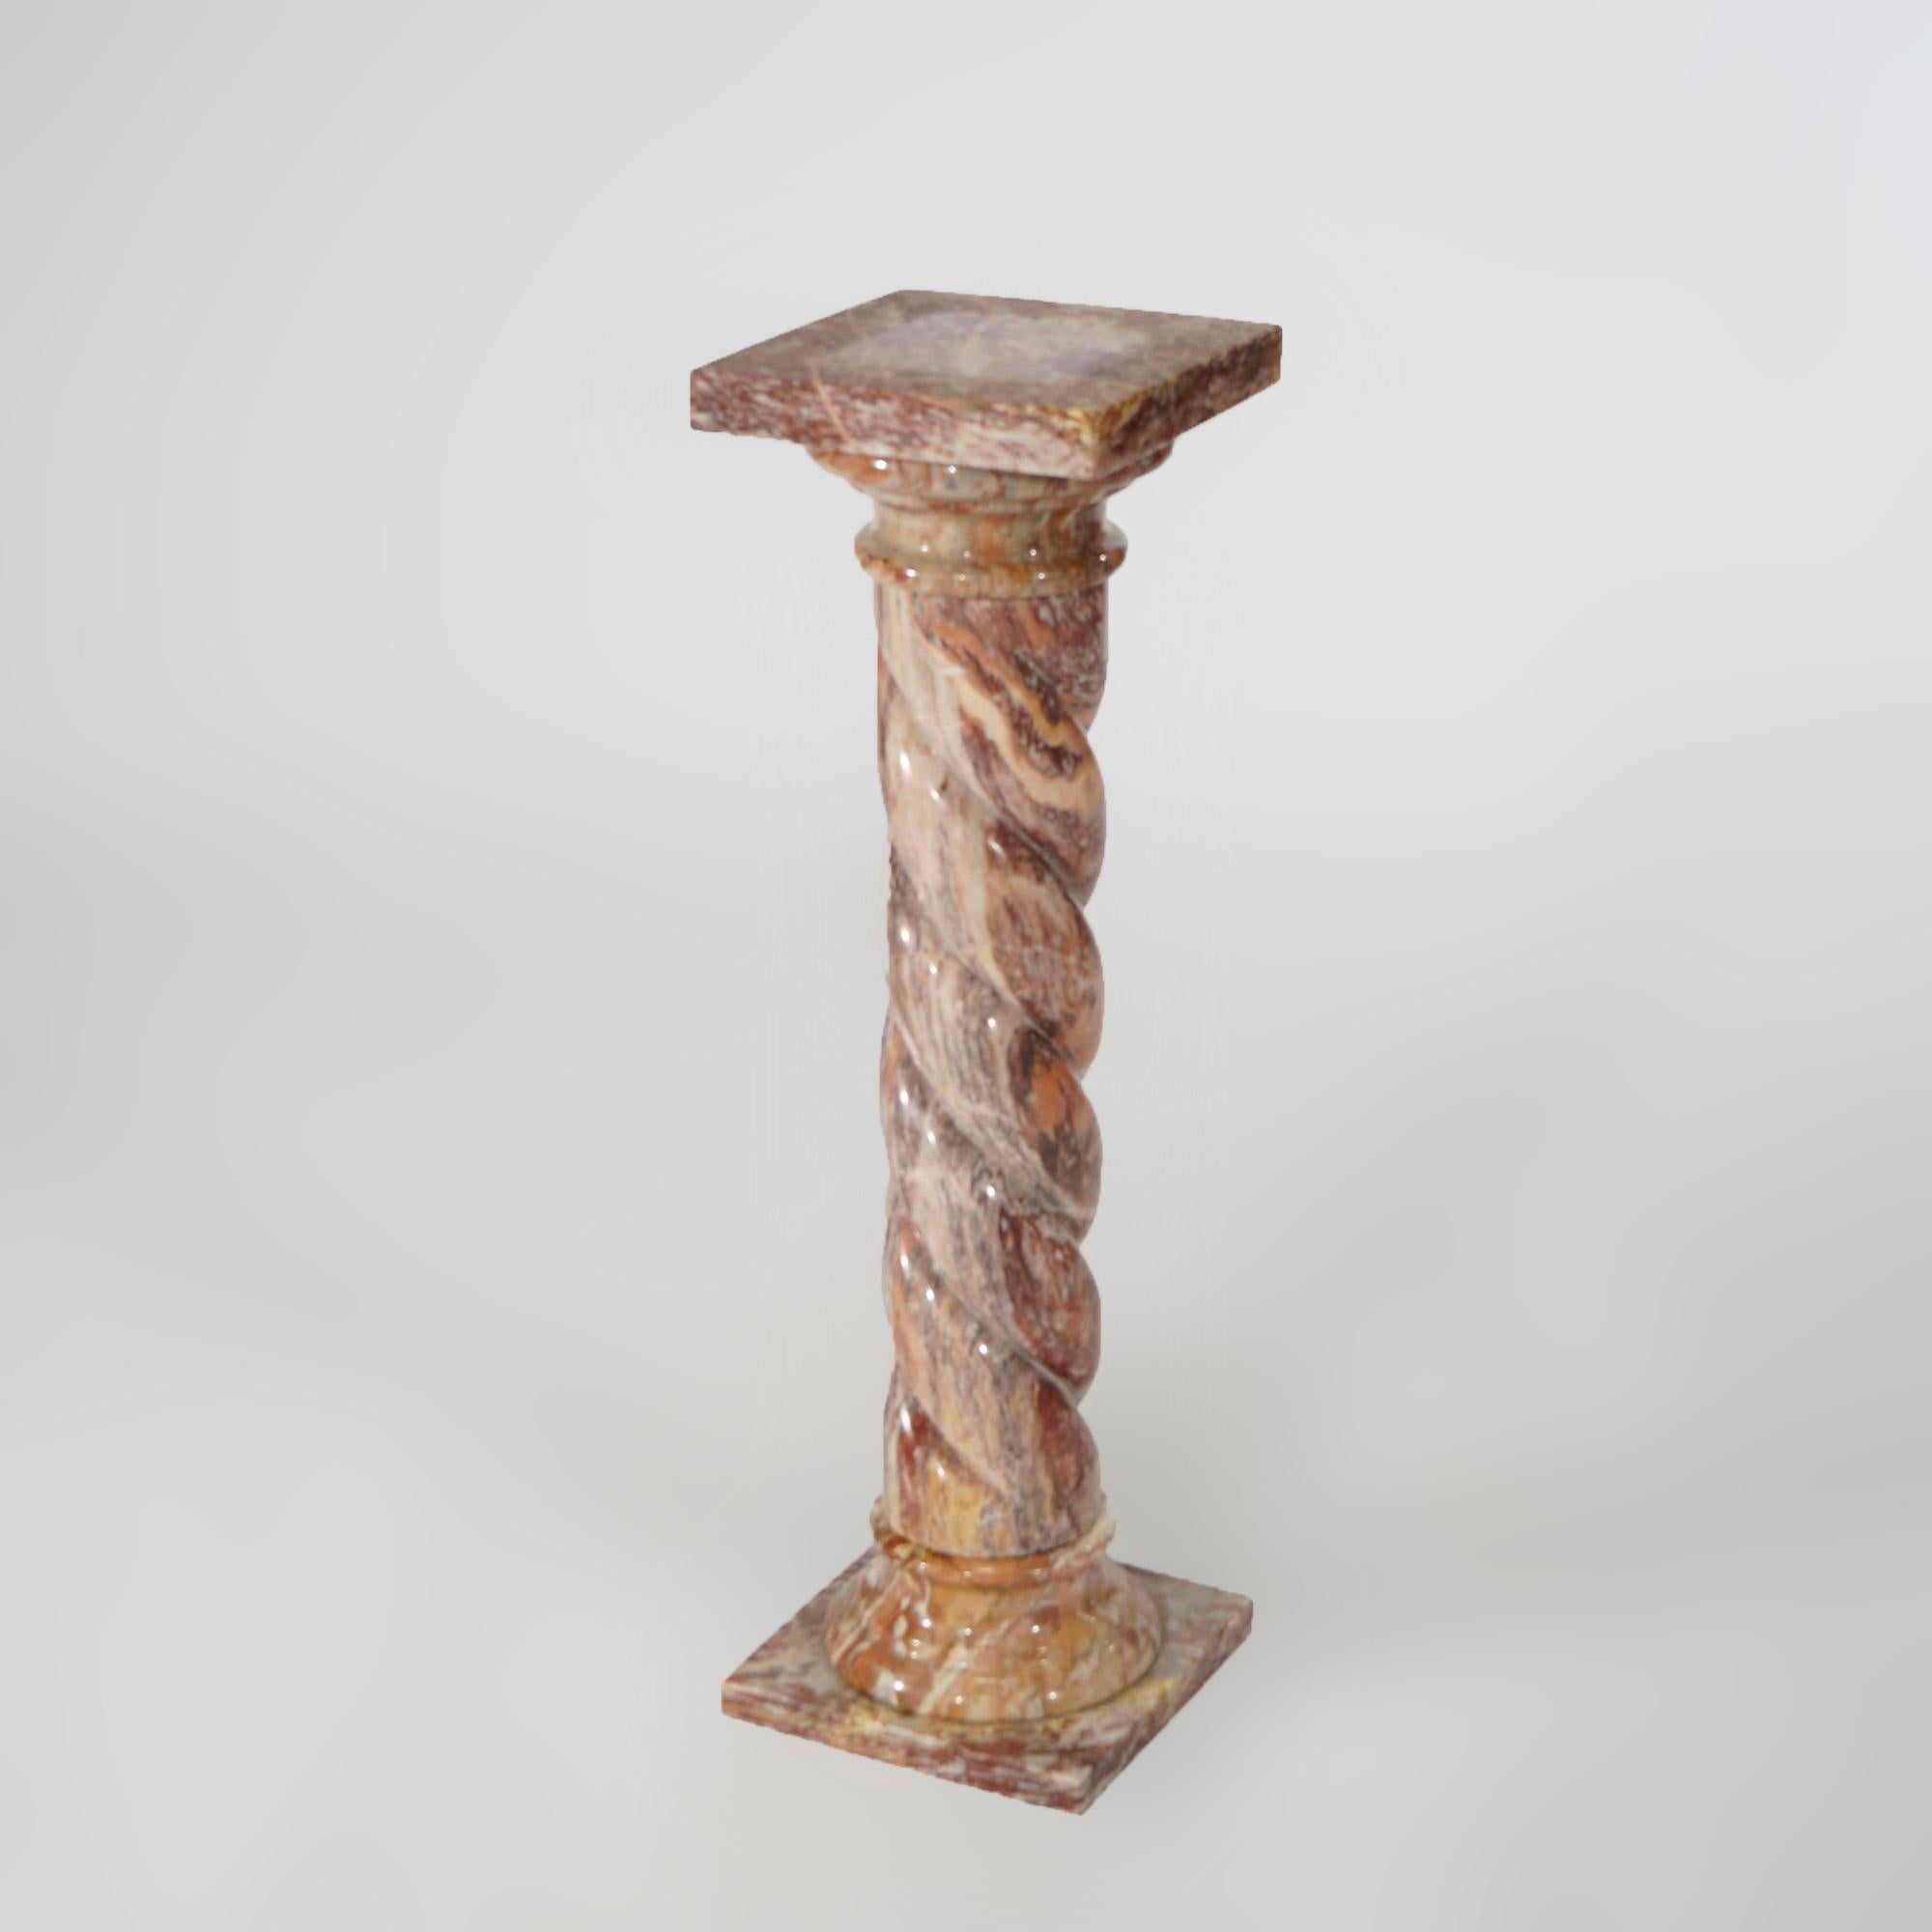 An antique Italian sculpture pedestal offers rouge marble construction with square display over rope twist column, c1920

Measures- 29.75'' H x 8.75'' W x 8.75'' D.

Catalogue Note: Ask about DISCOUNTED DELIVERY RATES available to most regions